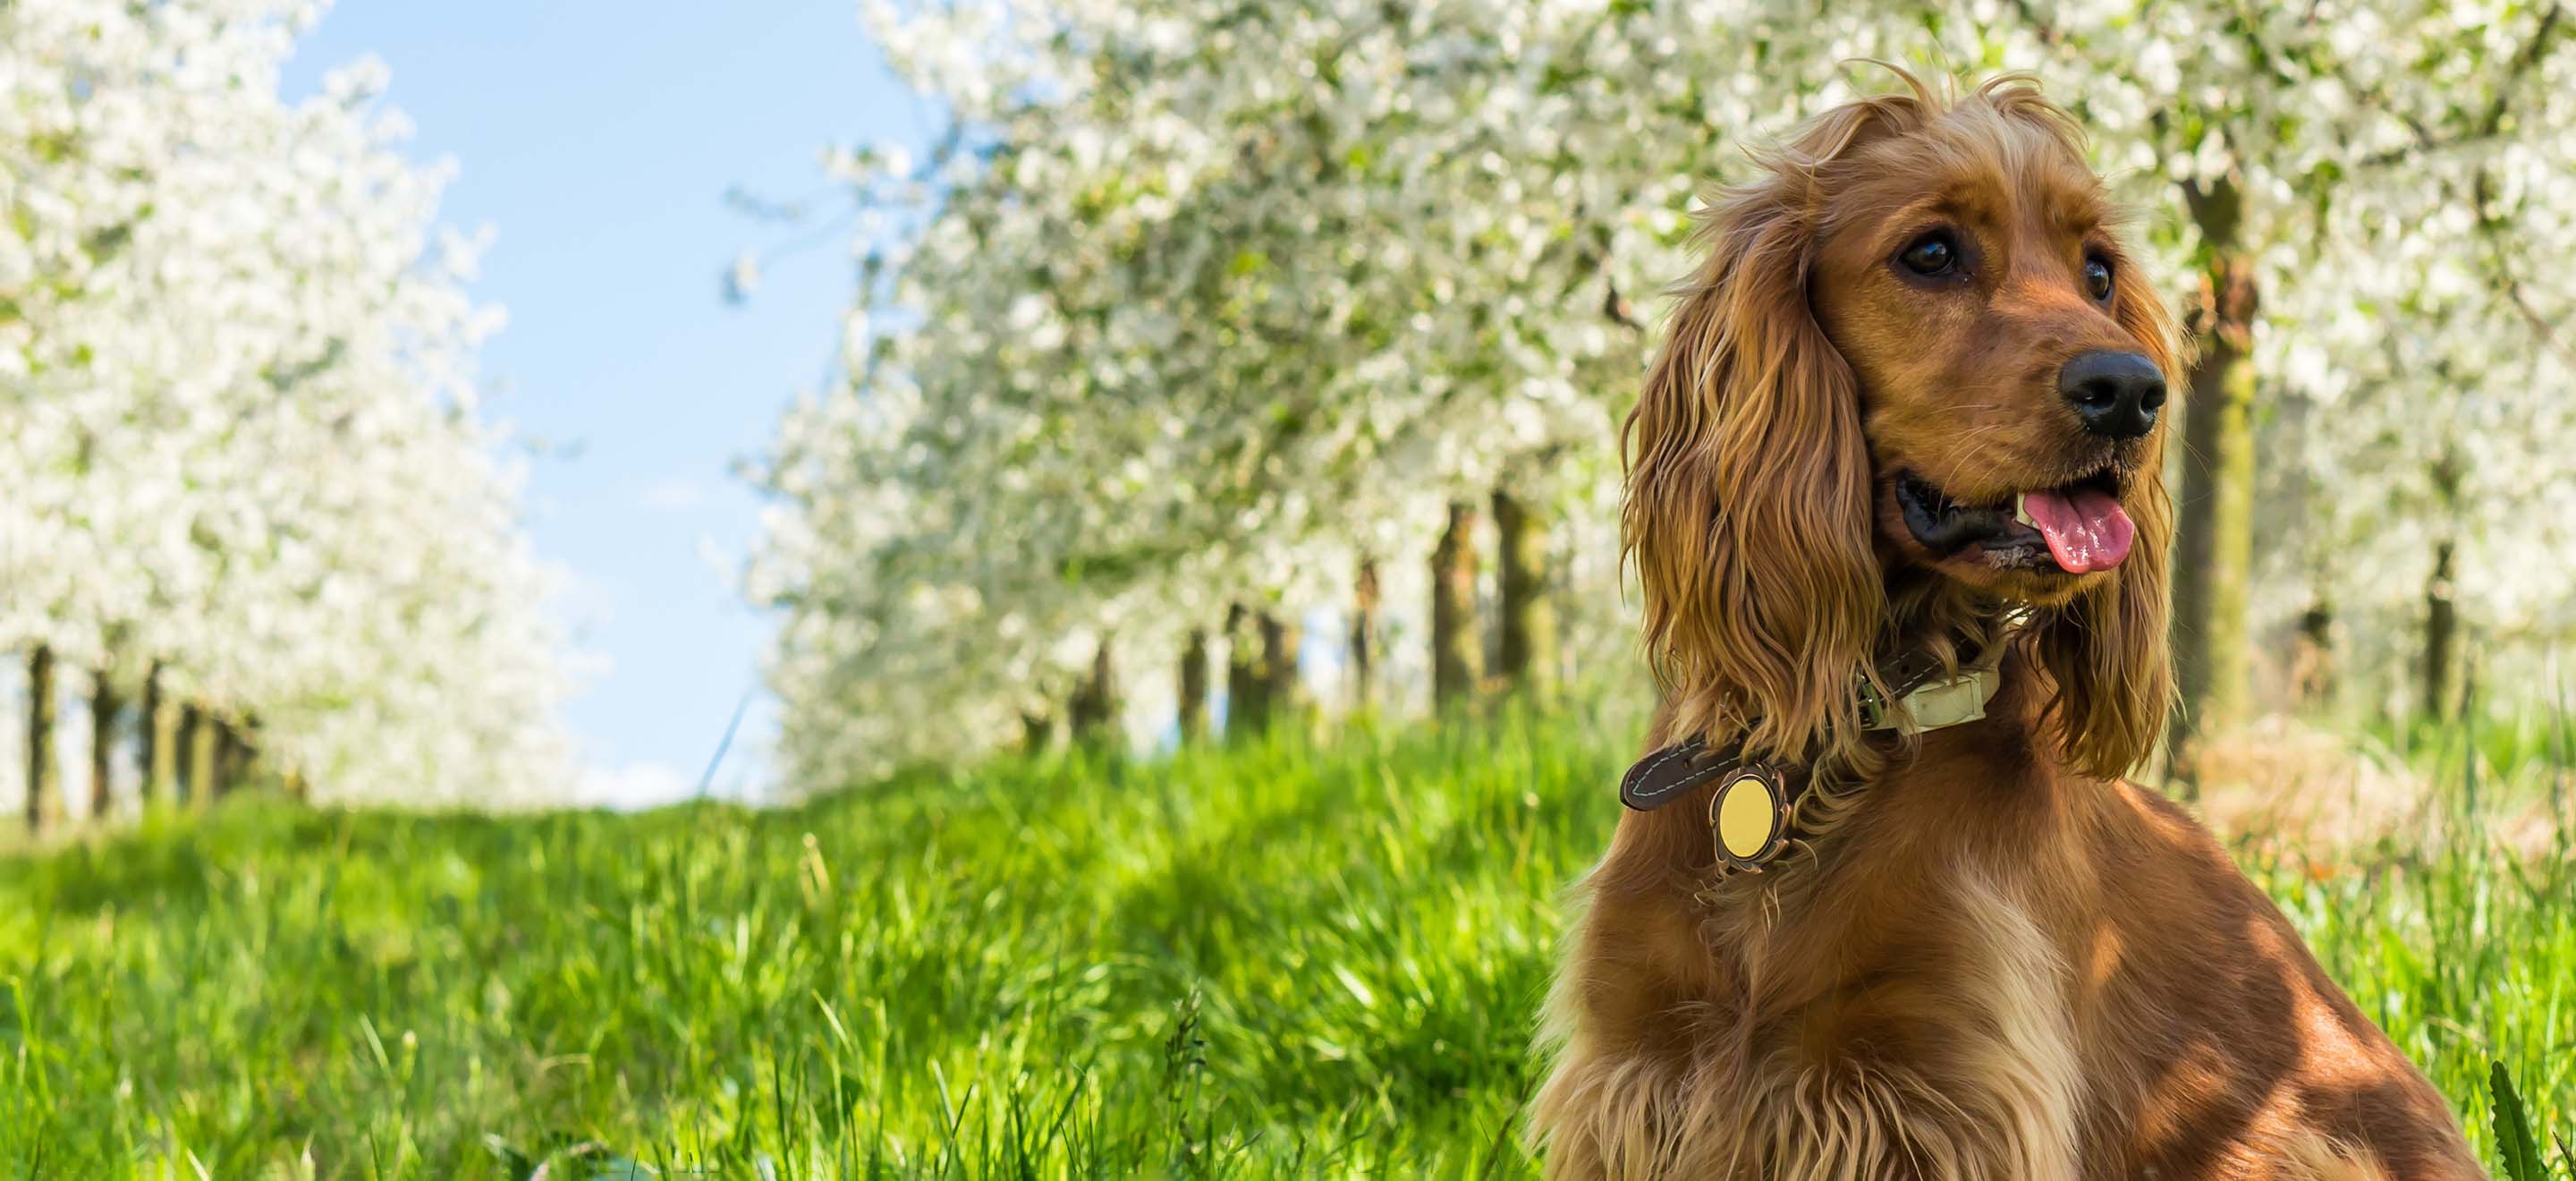 Brown Cocker Spaniel dog sitting in tall grass in a blooming apple tree orchard image